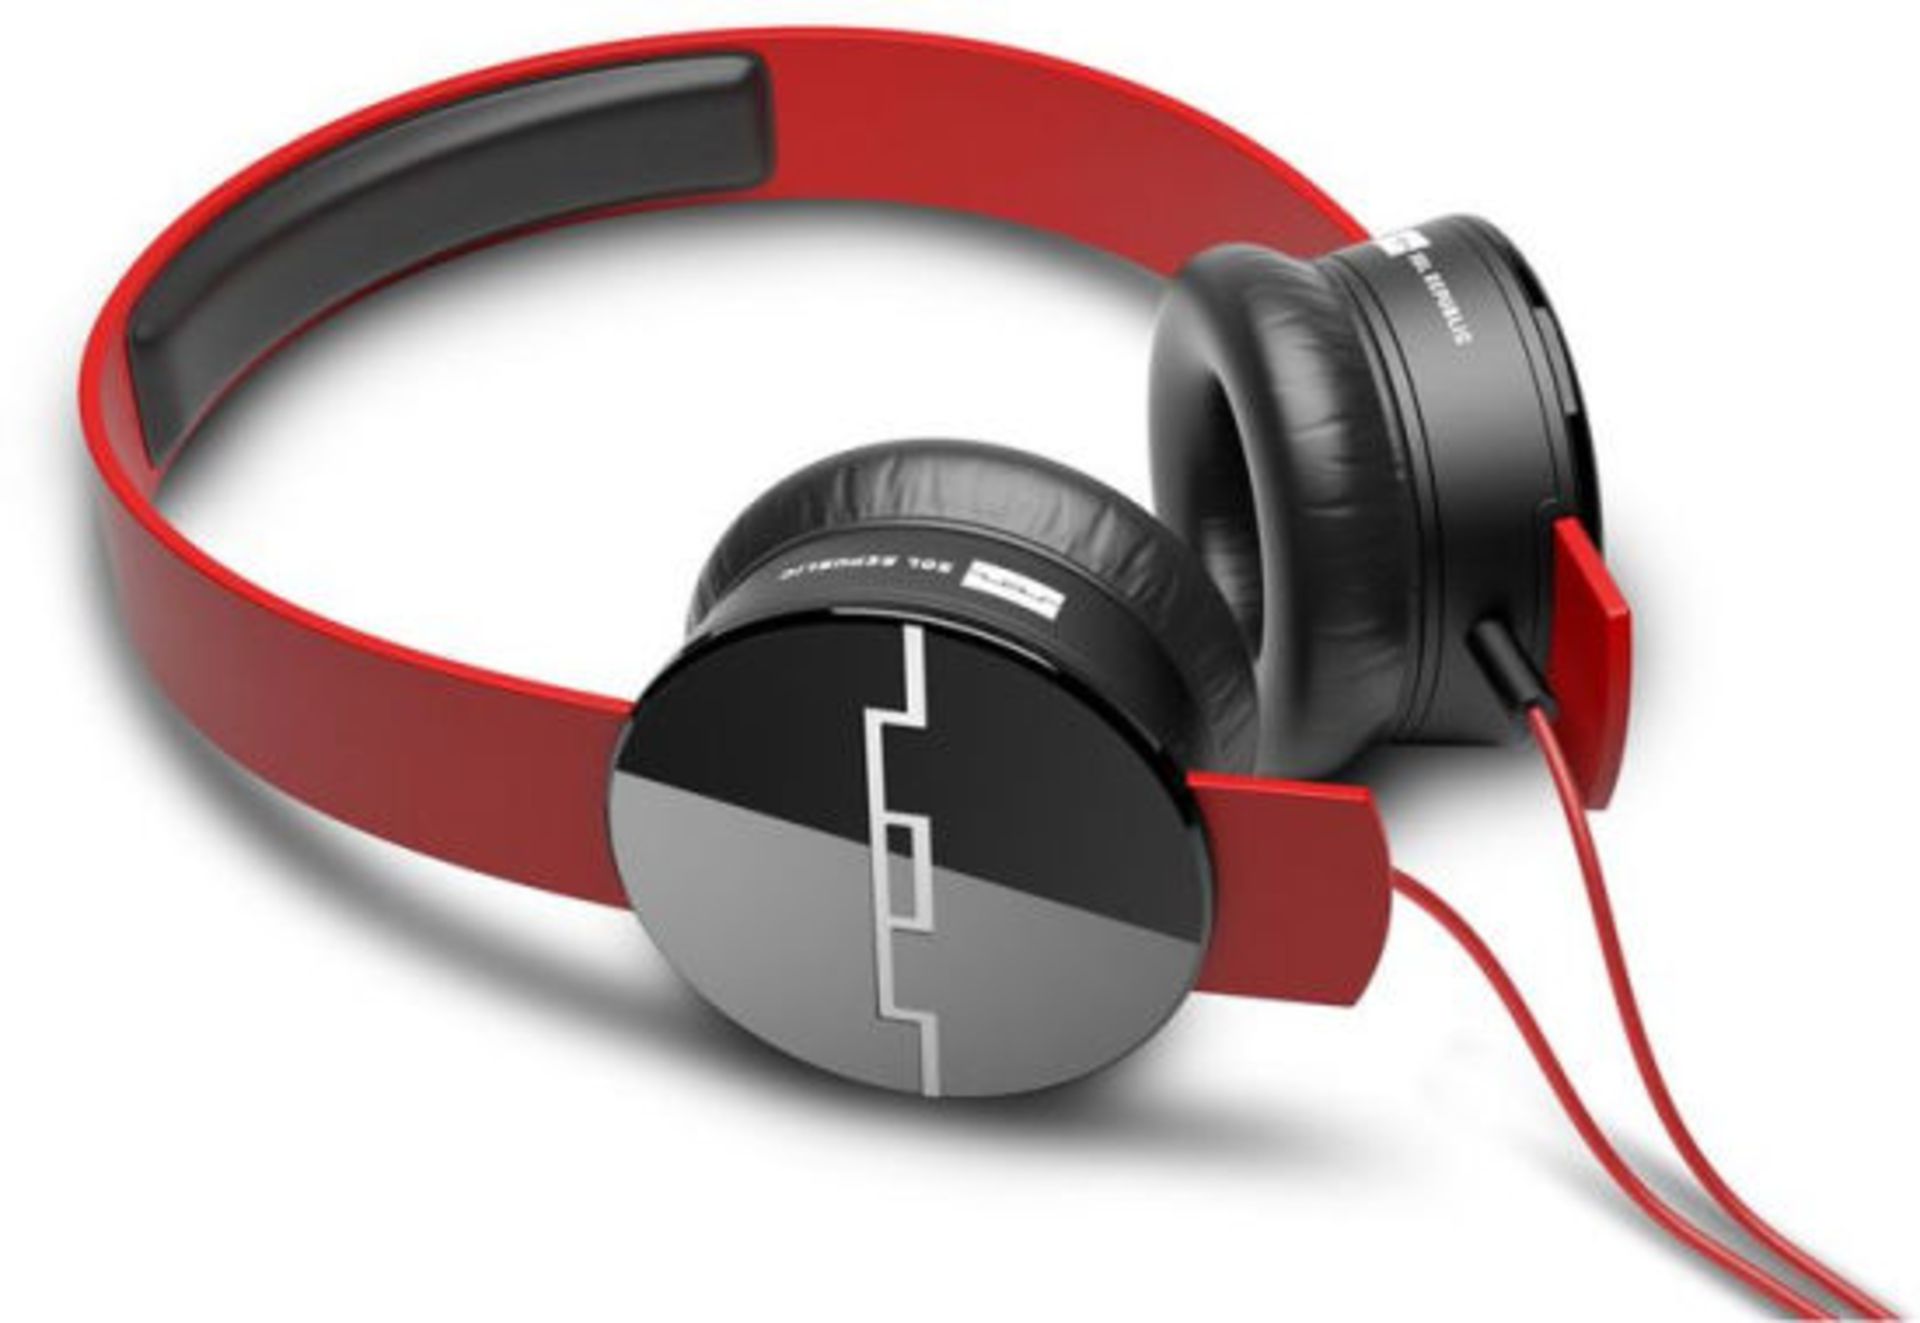 V Brand New Sol Republic Tracks V8 Red - With Sonic Ear Cushions - Music & Phone Control Virtually - Image 2 of 2